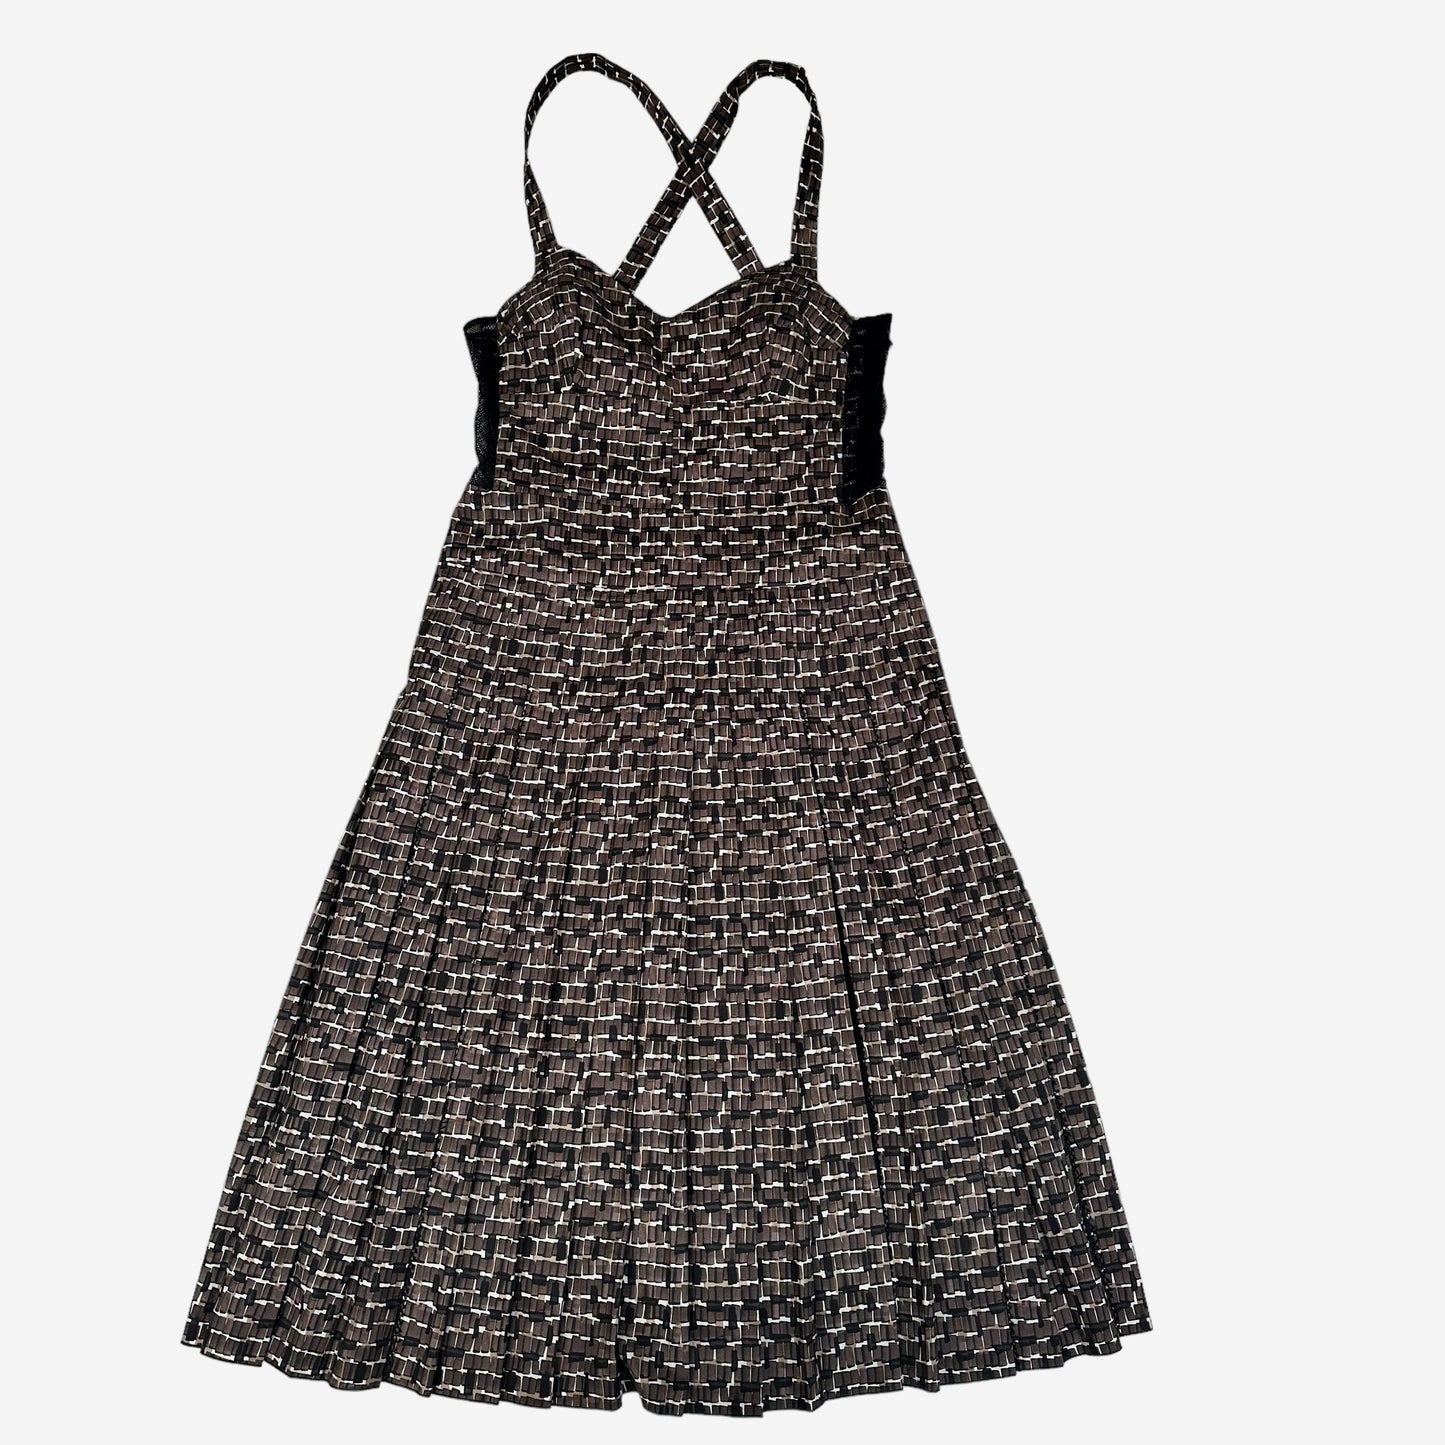 Brown Dress with Mesh Details - M